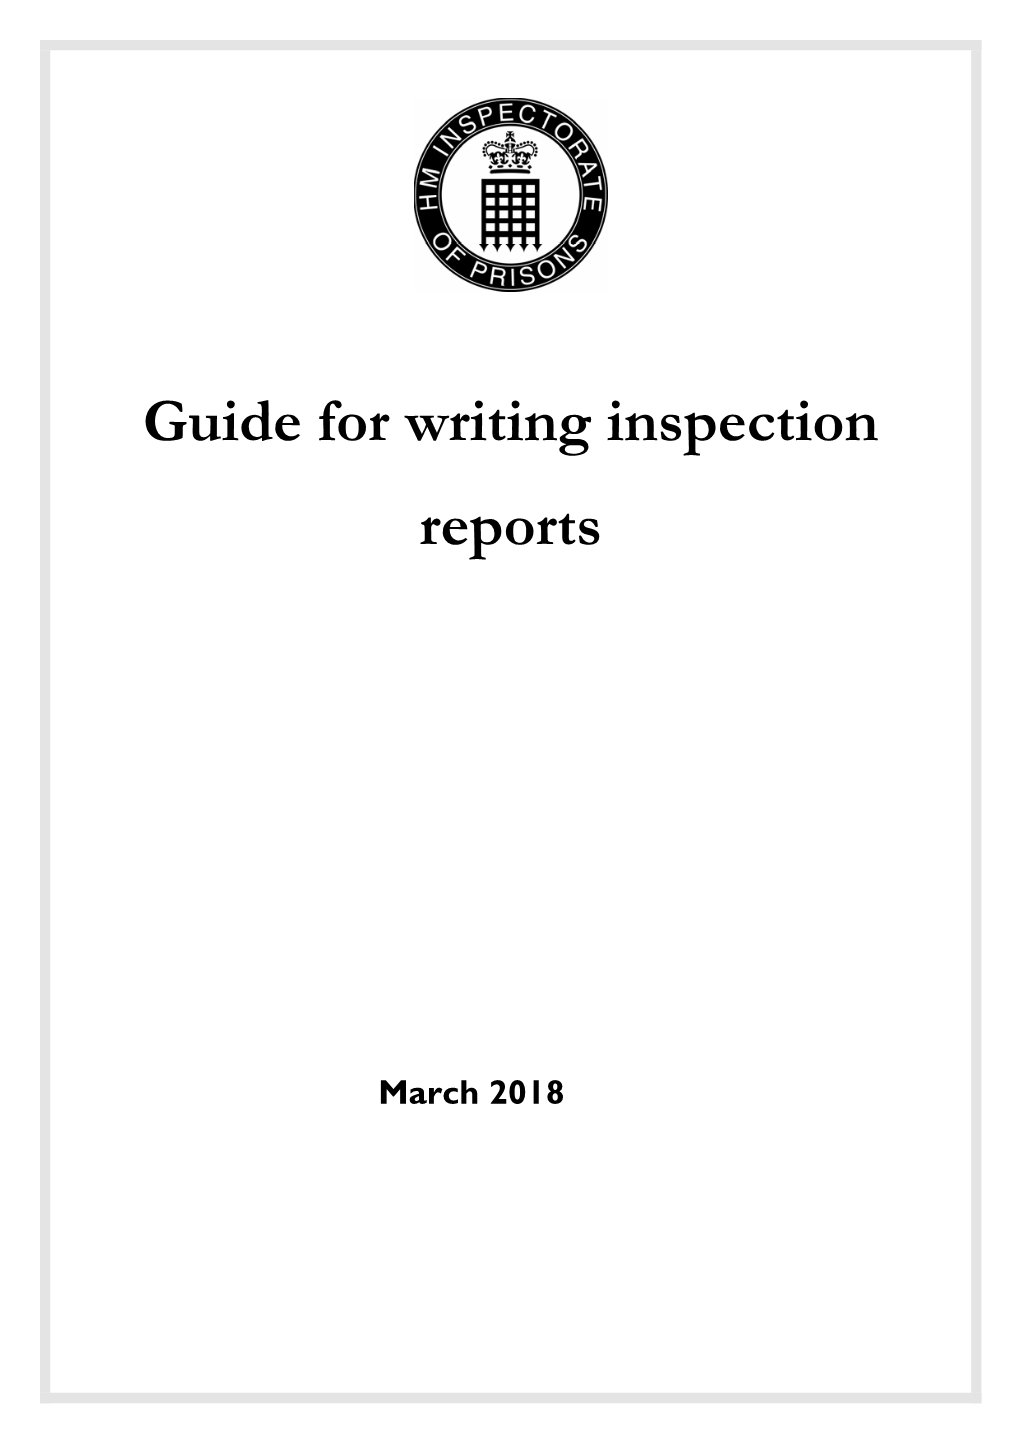 Guide for Writing Inspection Reports Contents Contents